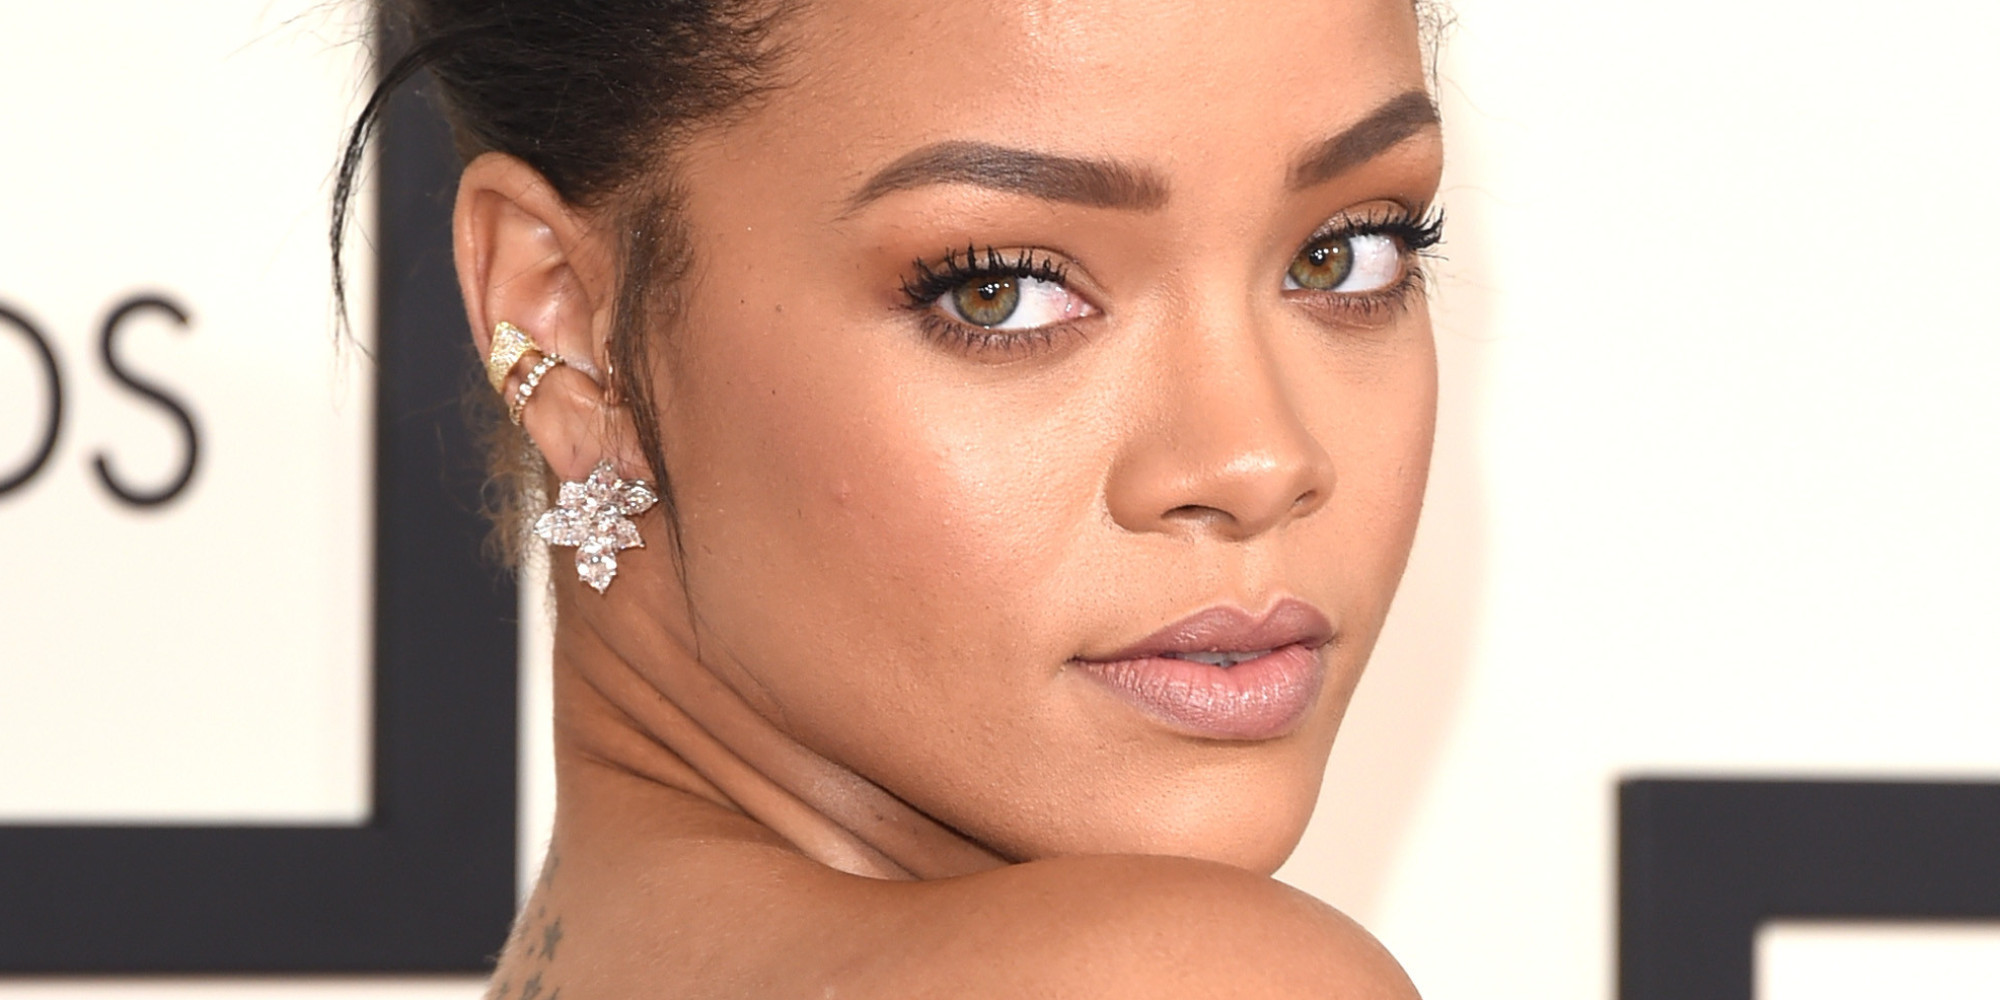 LOS ANGELES, CA - FEBRUARY 08:  Singer Rihanna attends The 57th Annual GRAMMY Awards at the STAPLES Center on February 8, 2015 in Los Angeles, California.  (Photo by Jason Merritt/Getty Images)